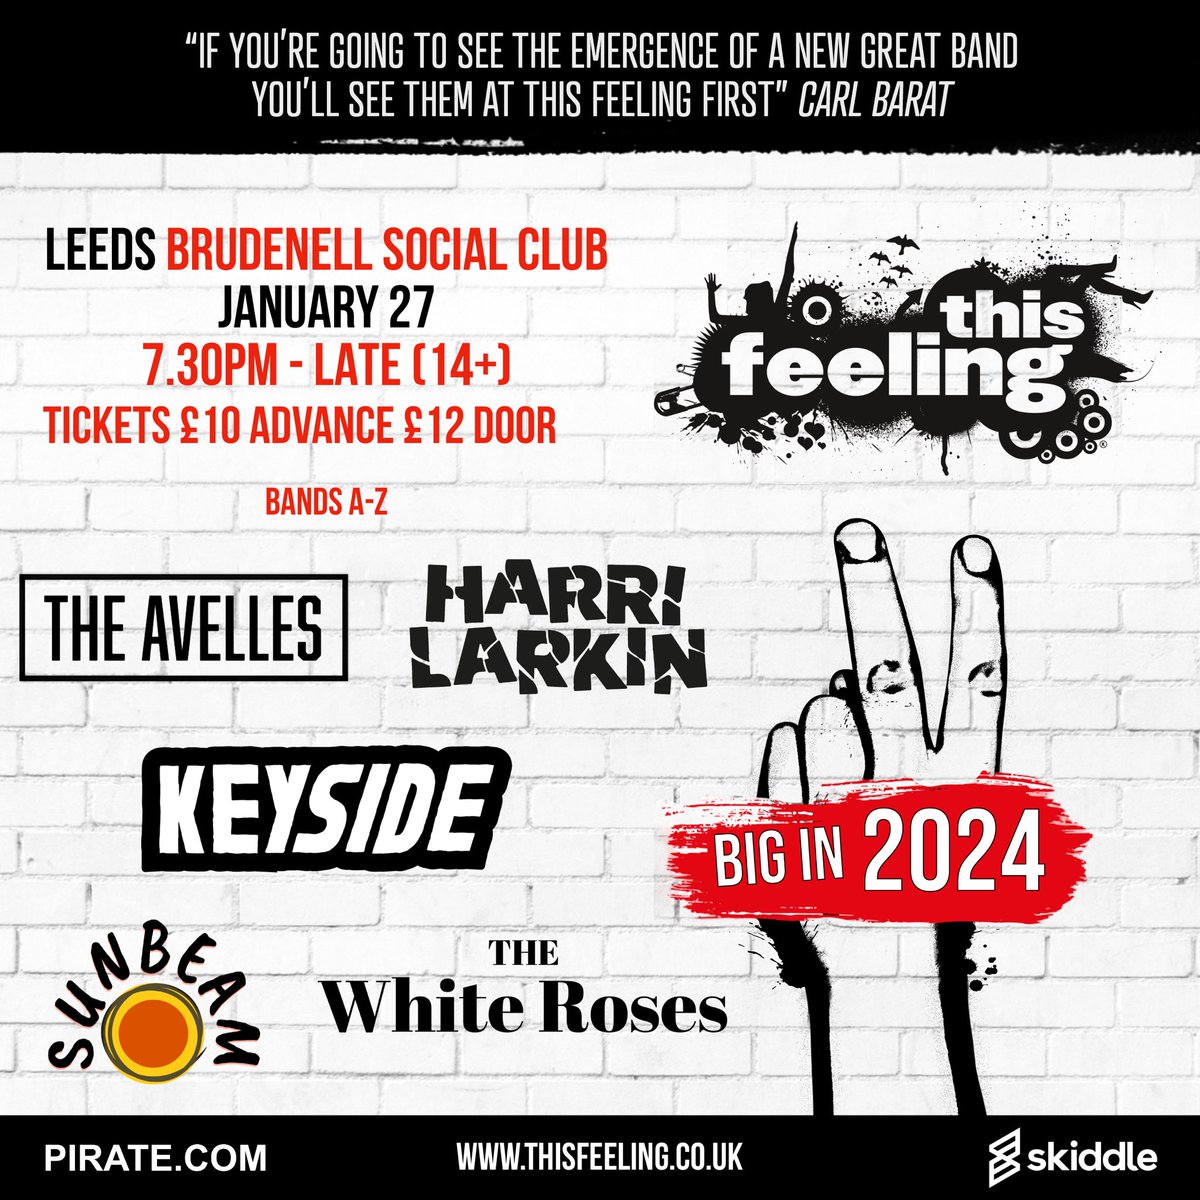 BIG IN 2024. We’ll be joining some top bands over at the legendary @Nath_Brudenell for the @This_Feeling BIG IN 2024. Tickets out 10am on Friday.